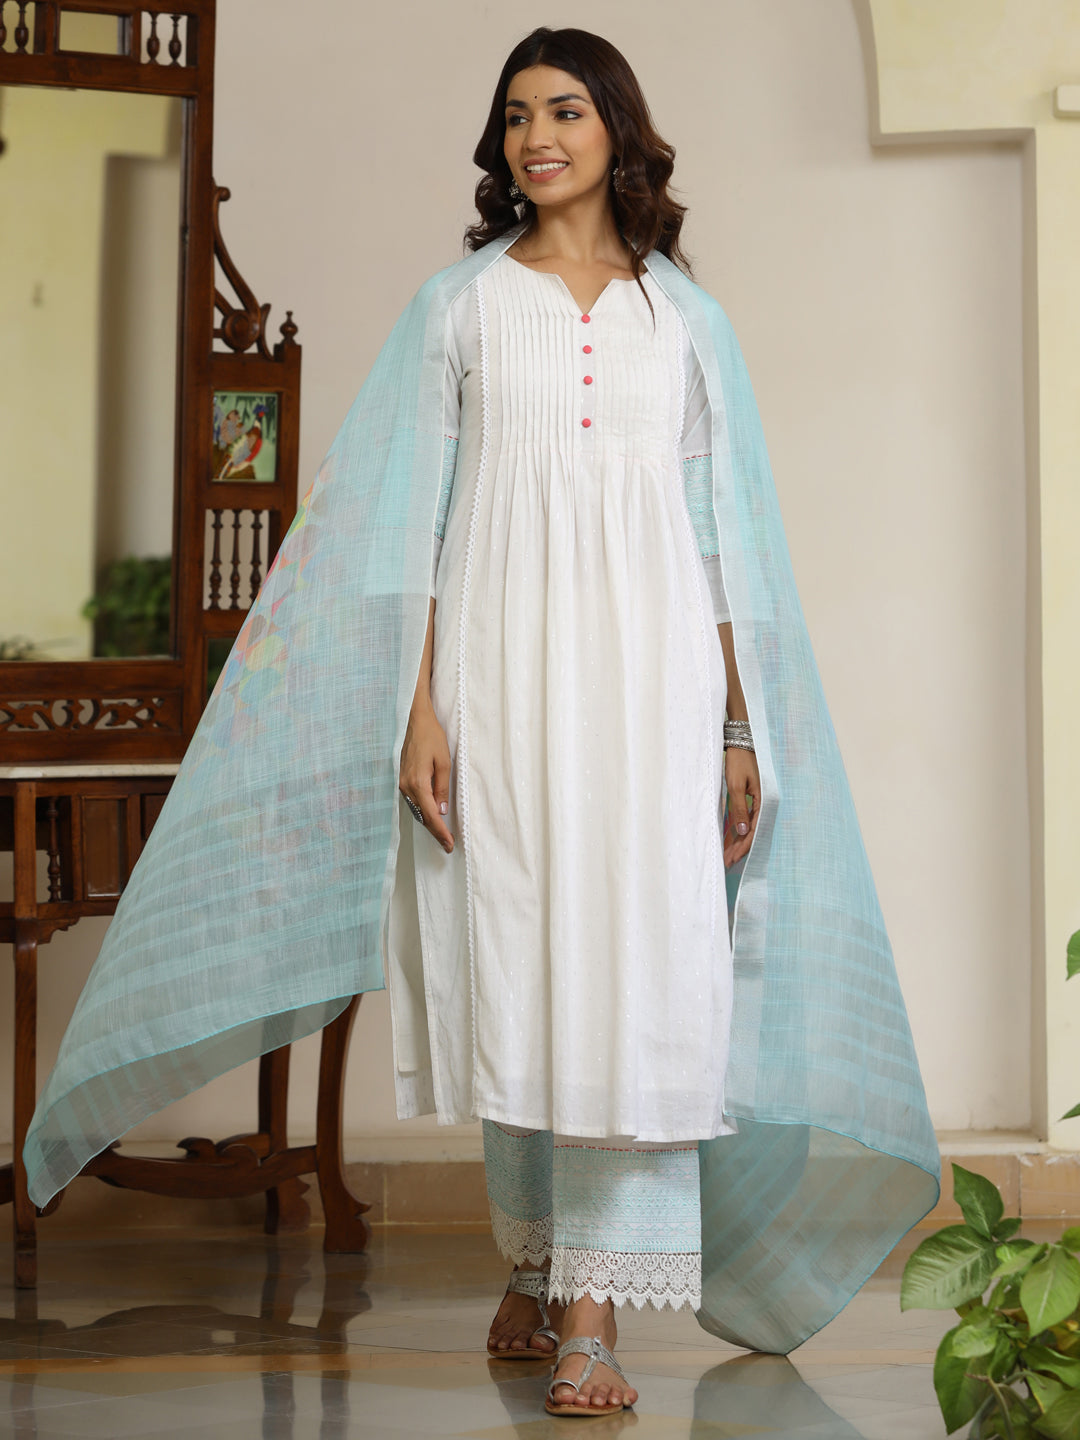 White Cotton Lurex Kurta Has A Round Neckline With Front Placket With Buttons And Both Side Pin Tucks Which Has Crochet Lace Inserted, Three Fourth Sleeves Has Thread Work Embroidery, A-Line With Flared Hemline, Cotton Blend White Palazzo Has Embroidery At Hemline With Both Side Pocket And Partially Elastic At Waist, Linen Digital Printed Dupatta.